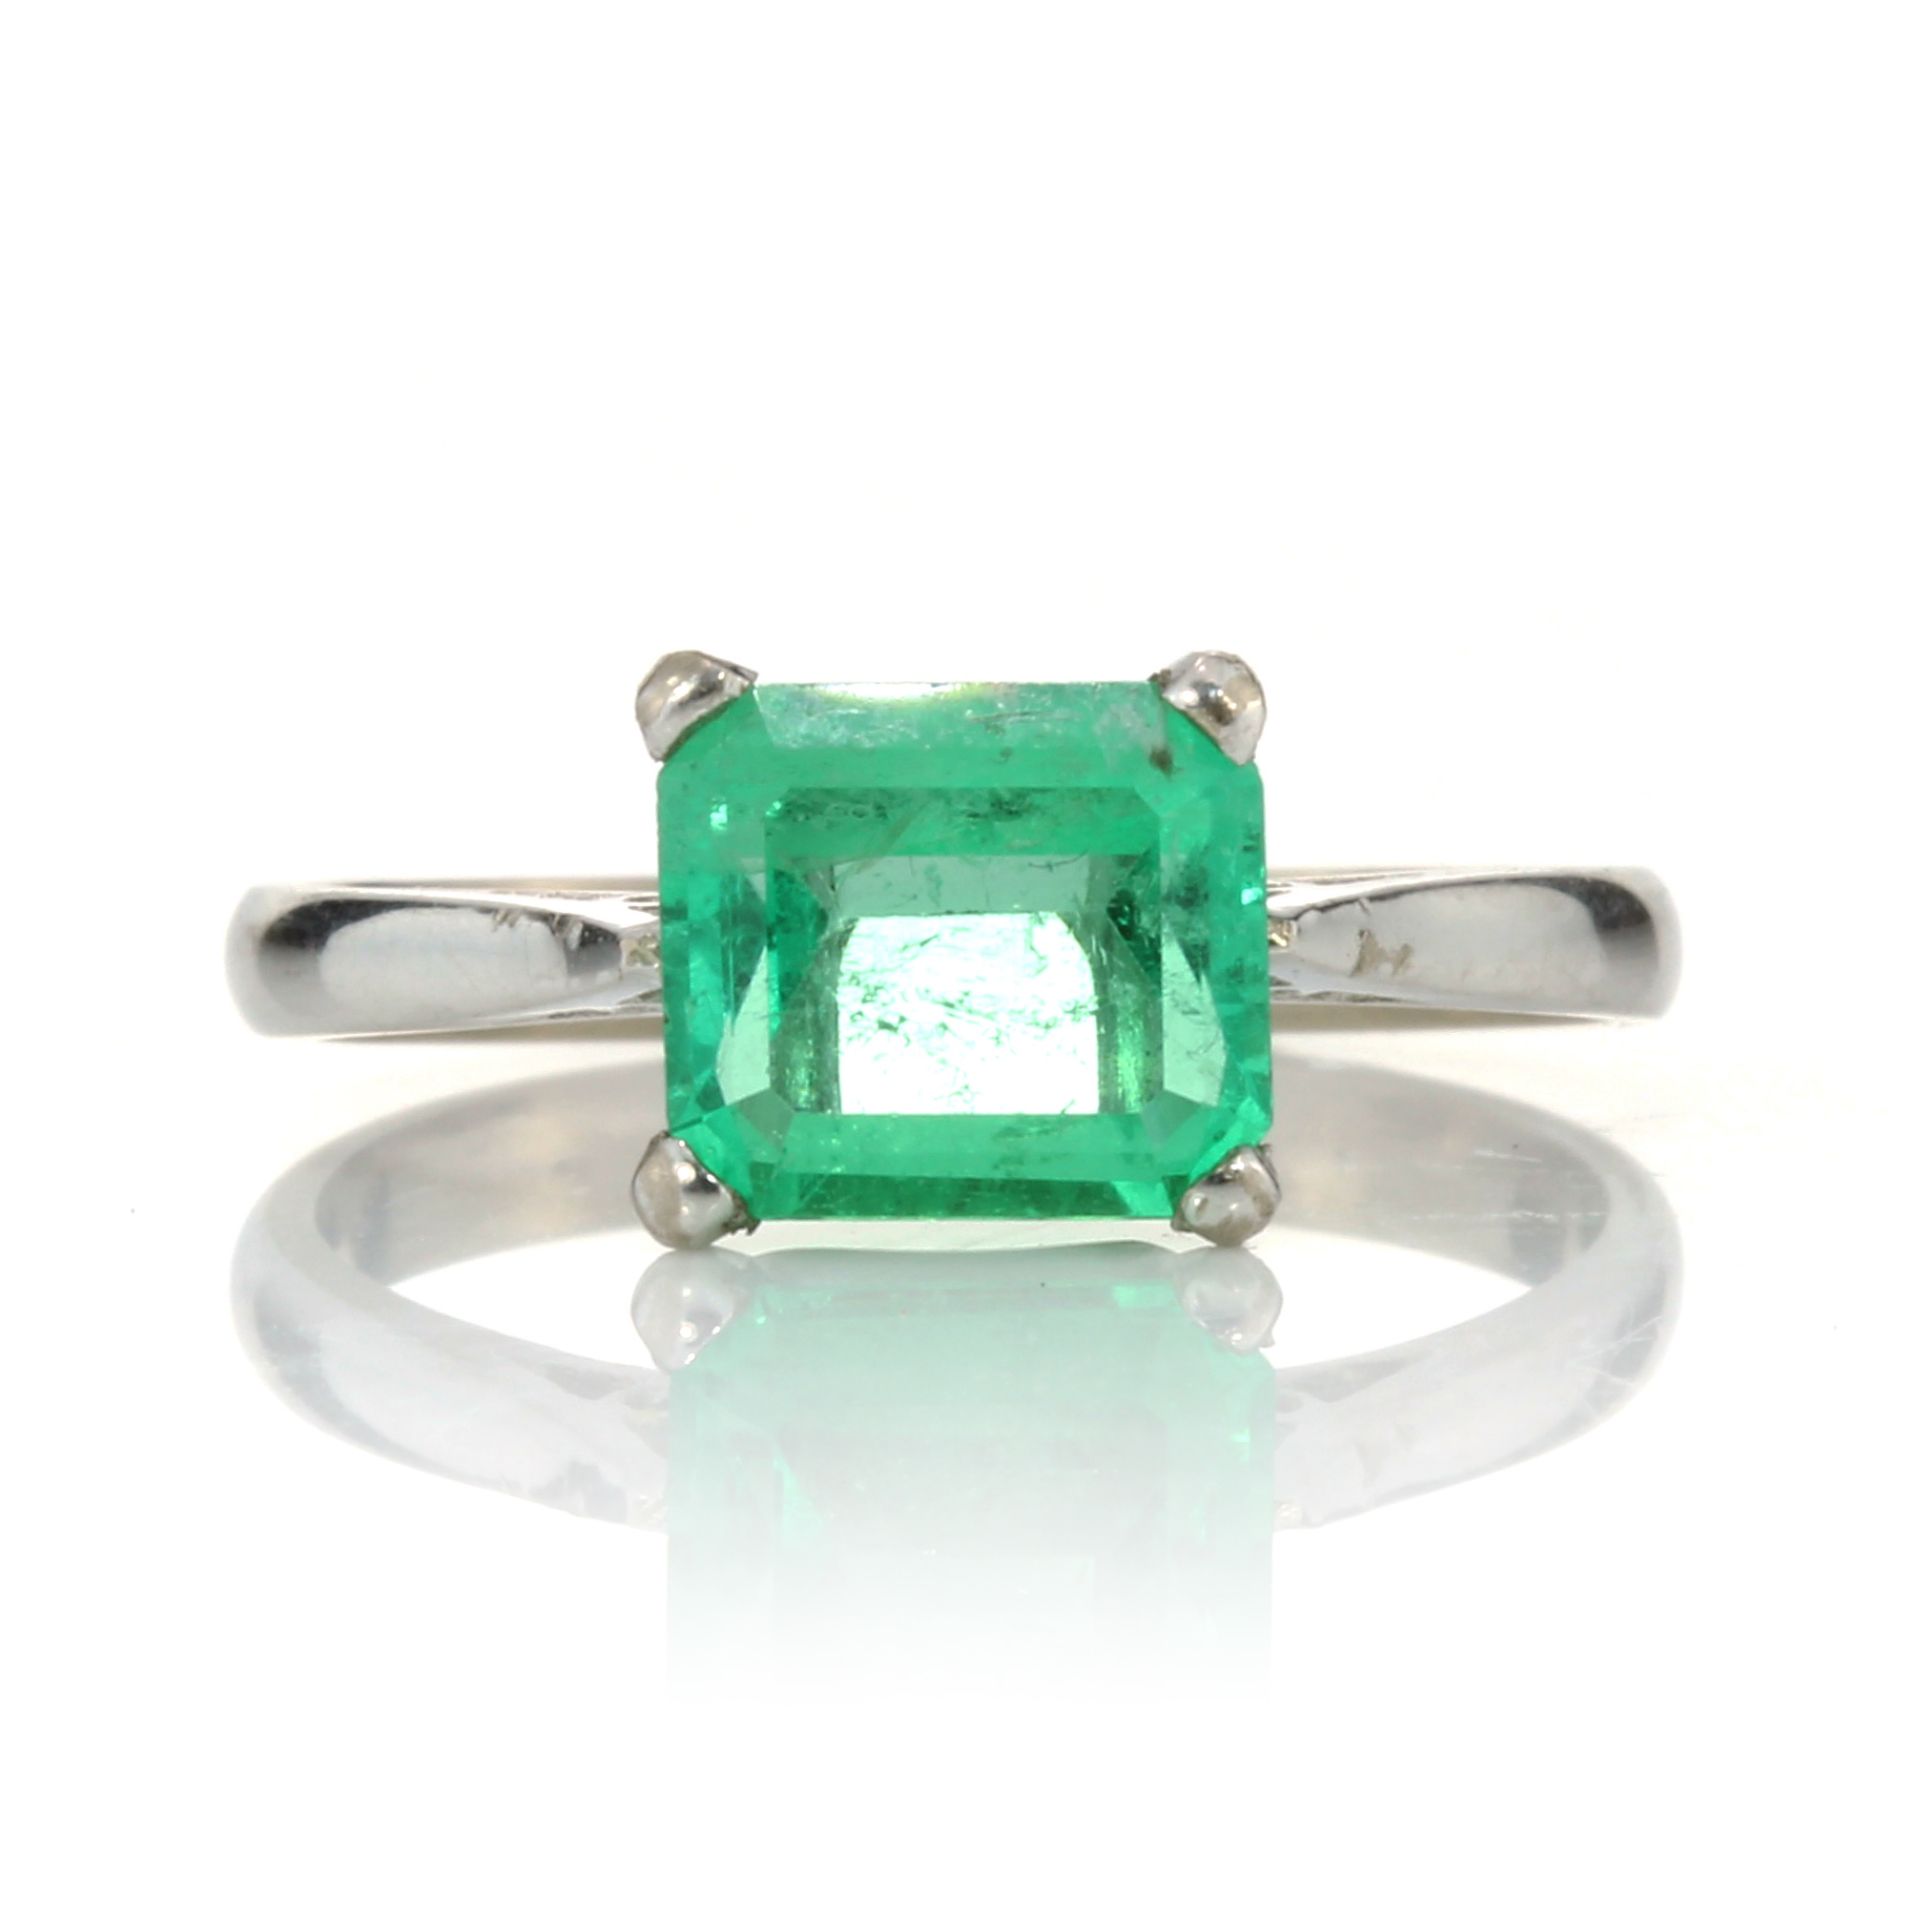 AN EMERALD DRESS RING set with a cut cornered step cut emerald of 1.86 carats to a plain tapering